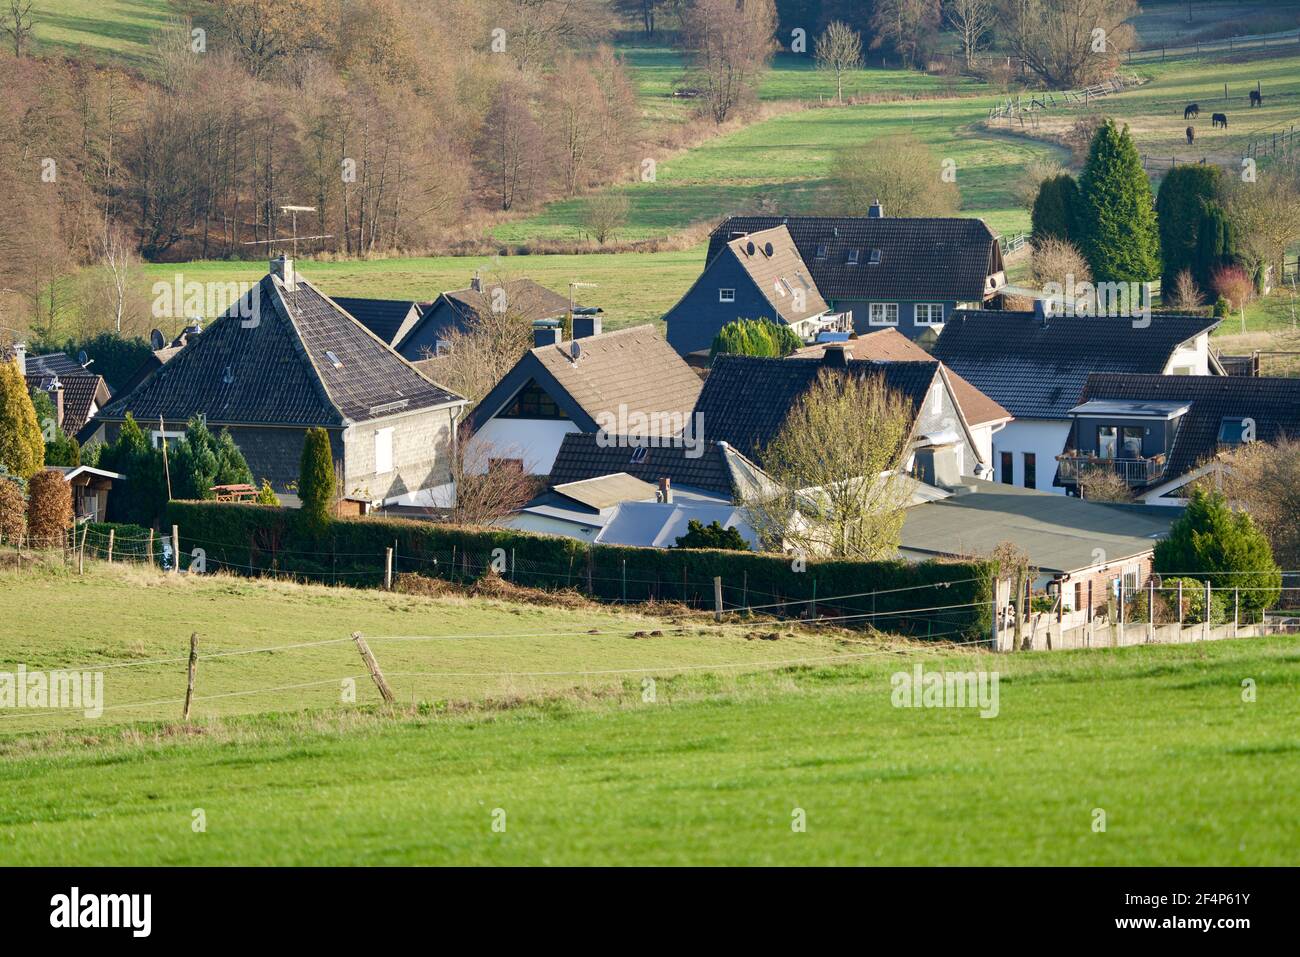 Homes of Wermelskirchen Stock Photo